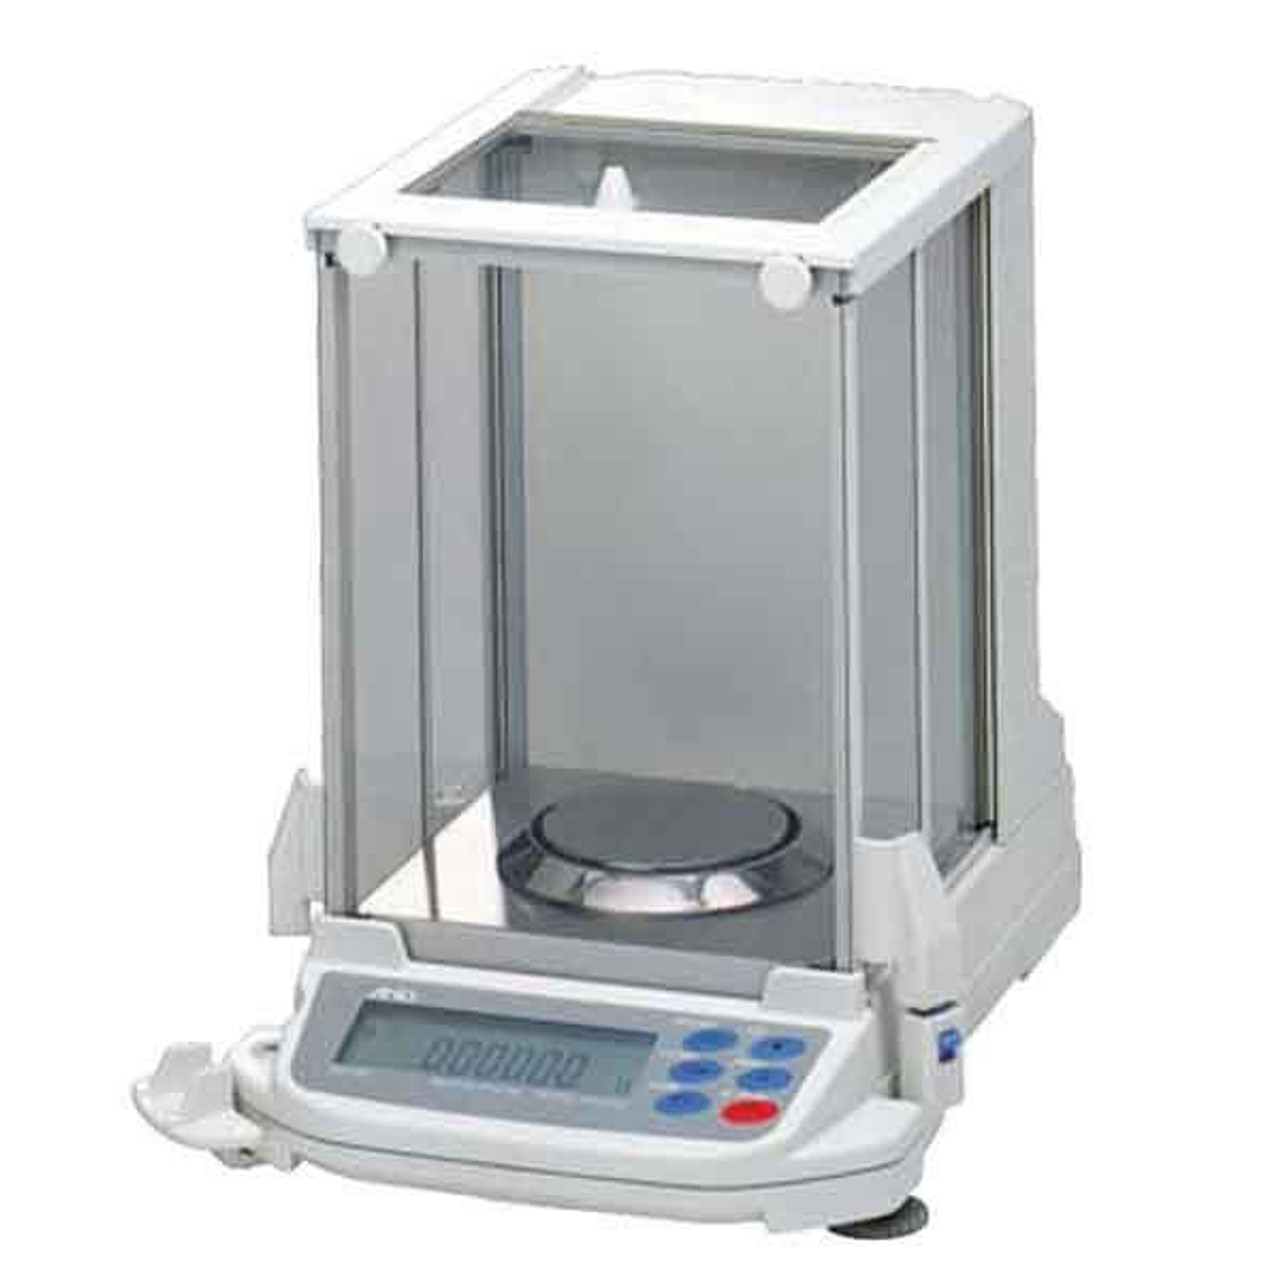 Lab Analytical Precision Balance 220g 0.0001g Electronic Scale